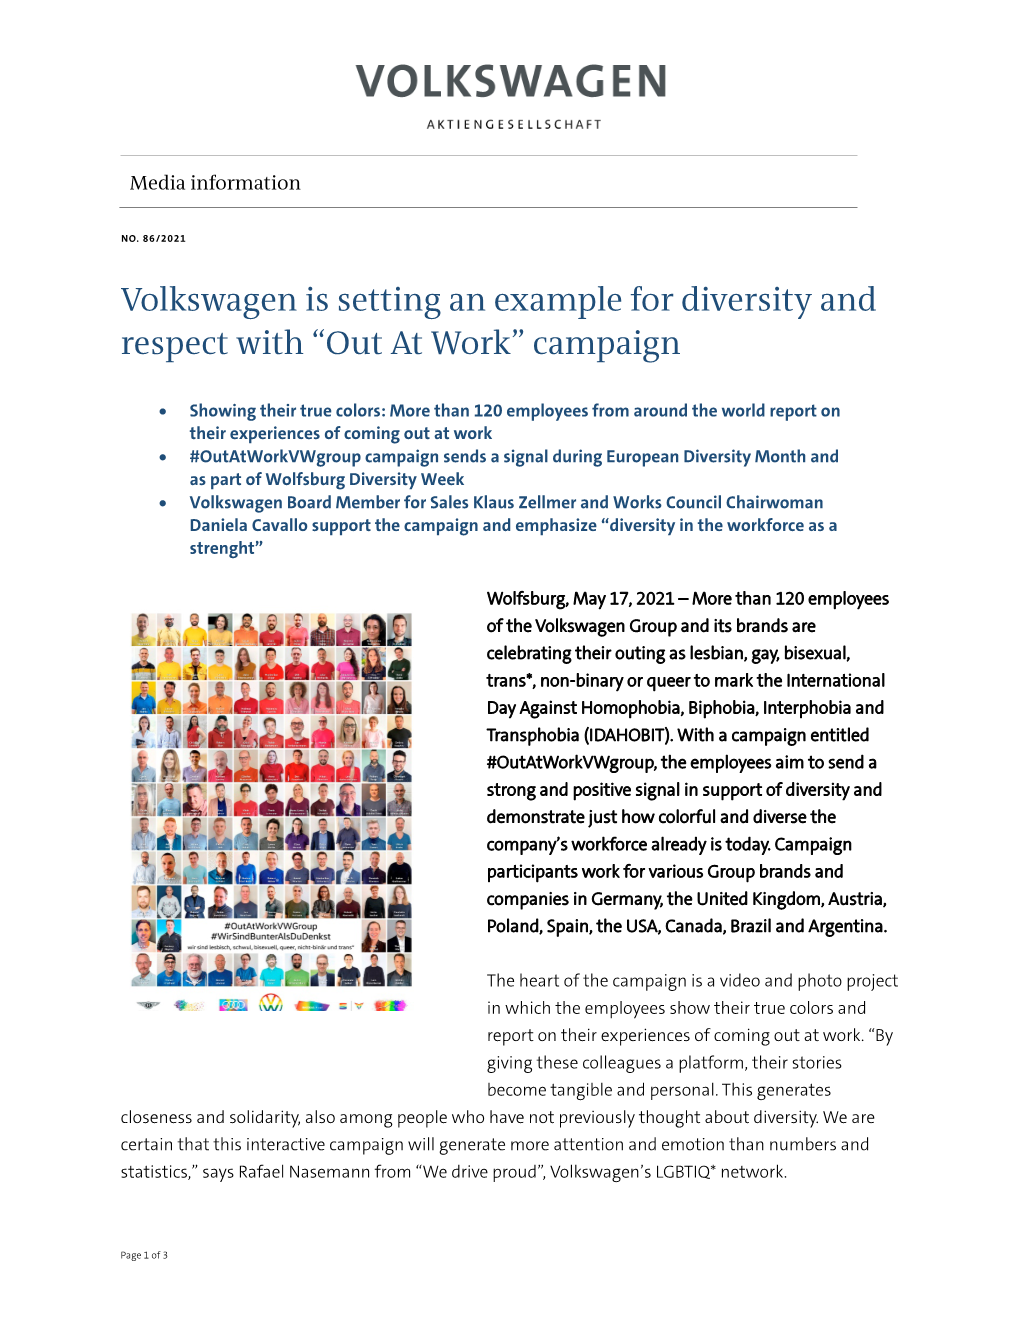 Volkswagen Is Setting an Example for Diversity and Respect with “Out at Work” Campaign